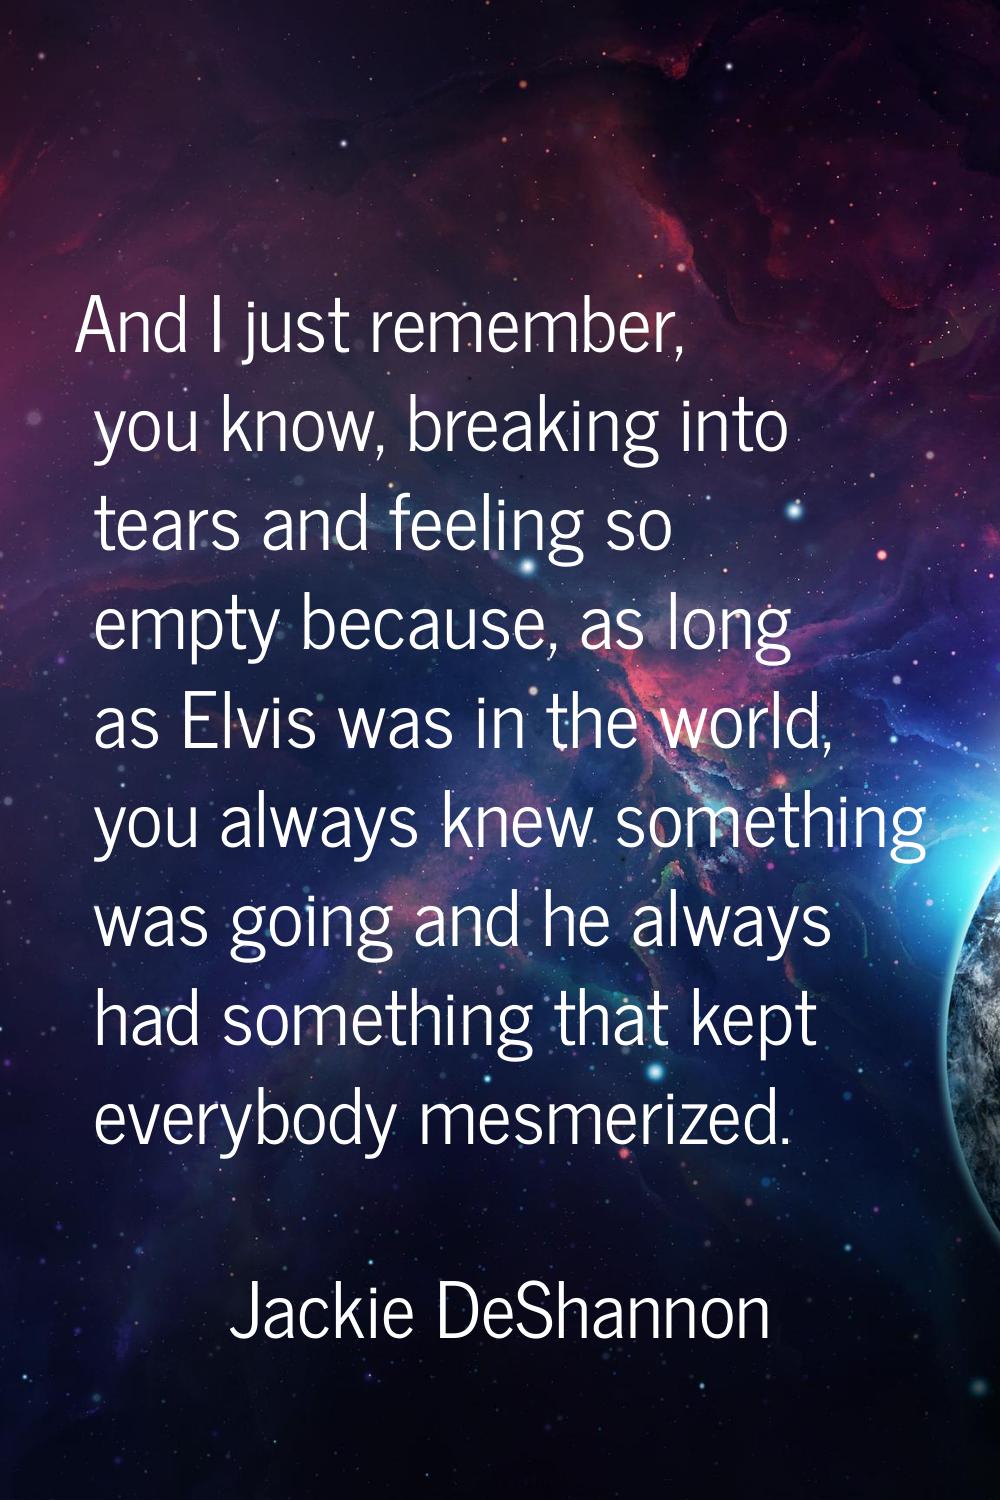 And I just remember, you know, breaking into tears and feeling so empty because, as long as Elvis w